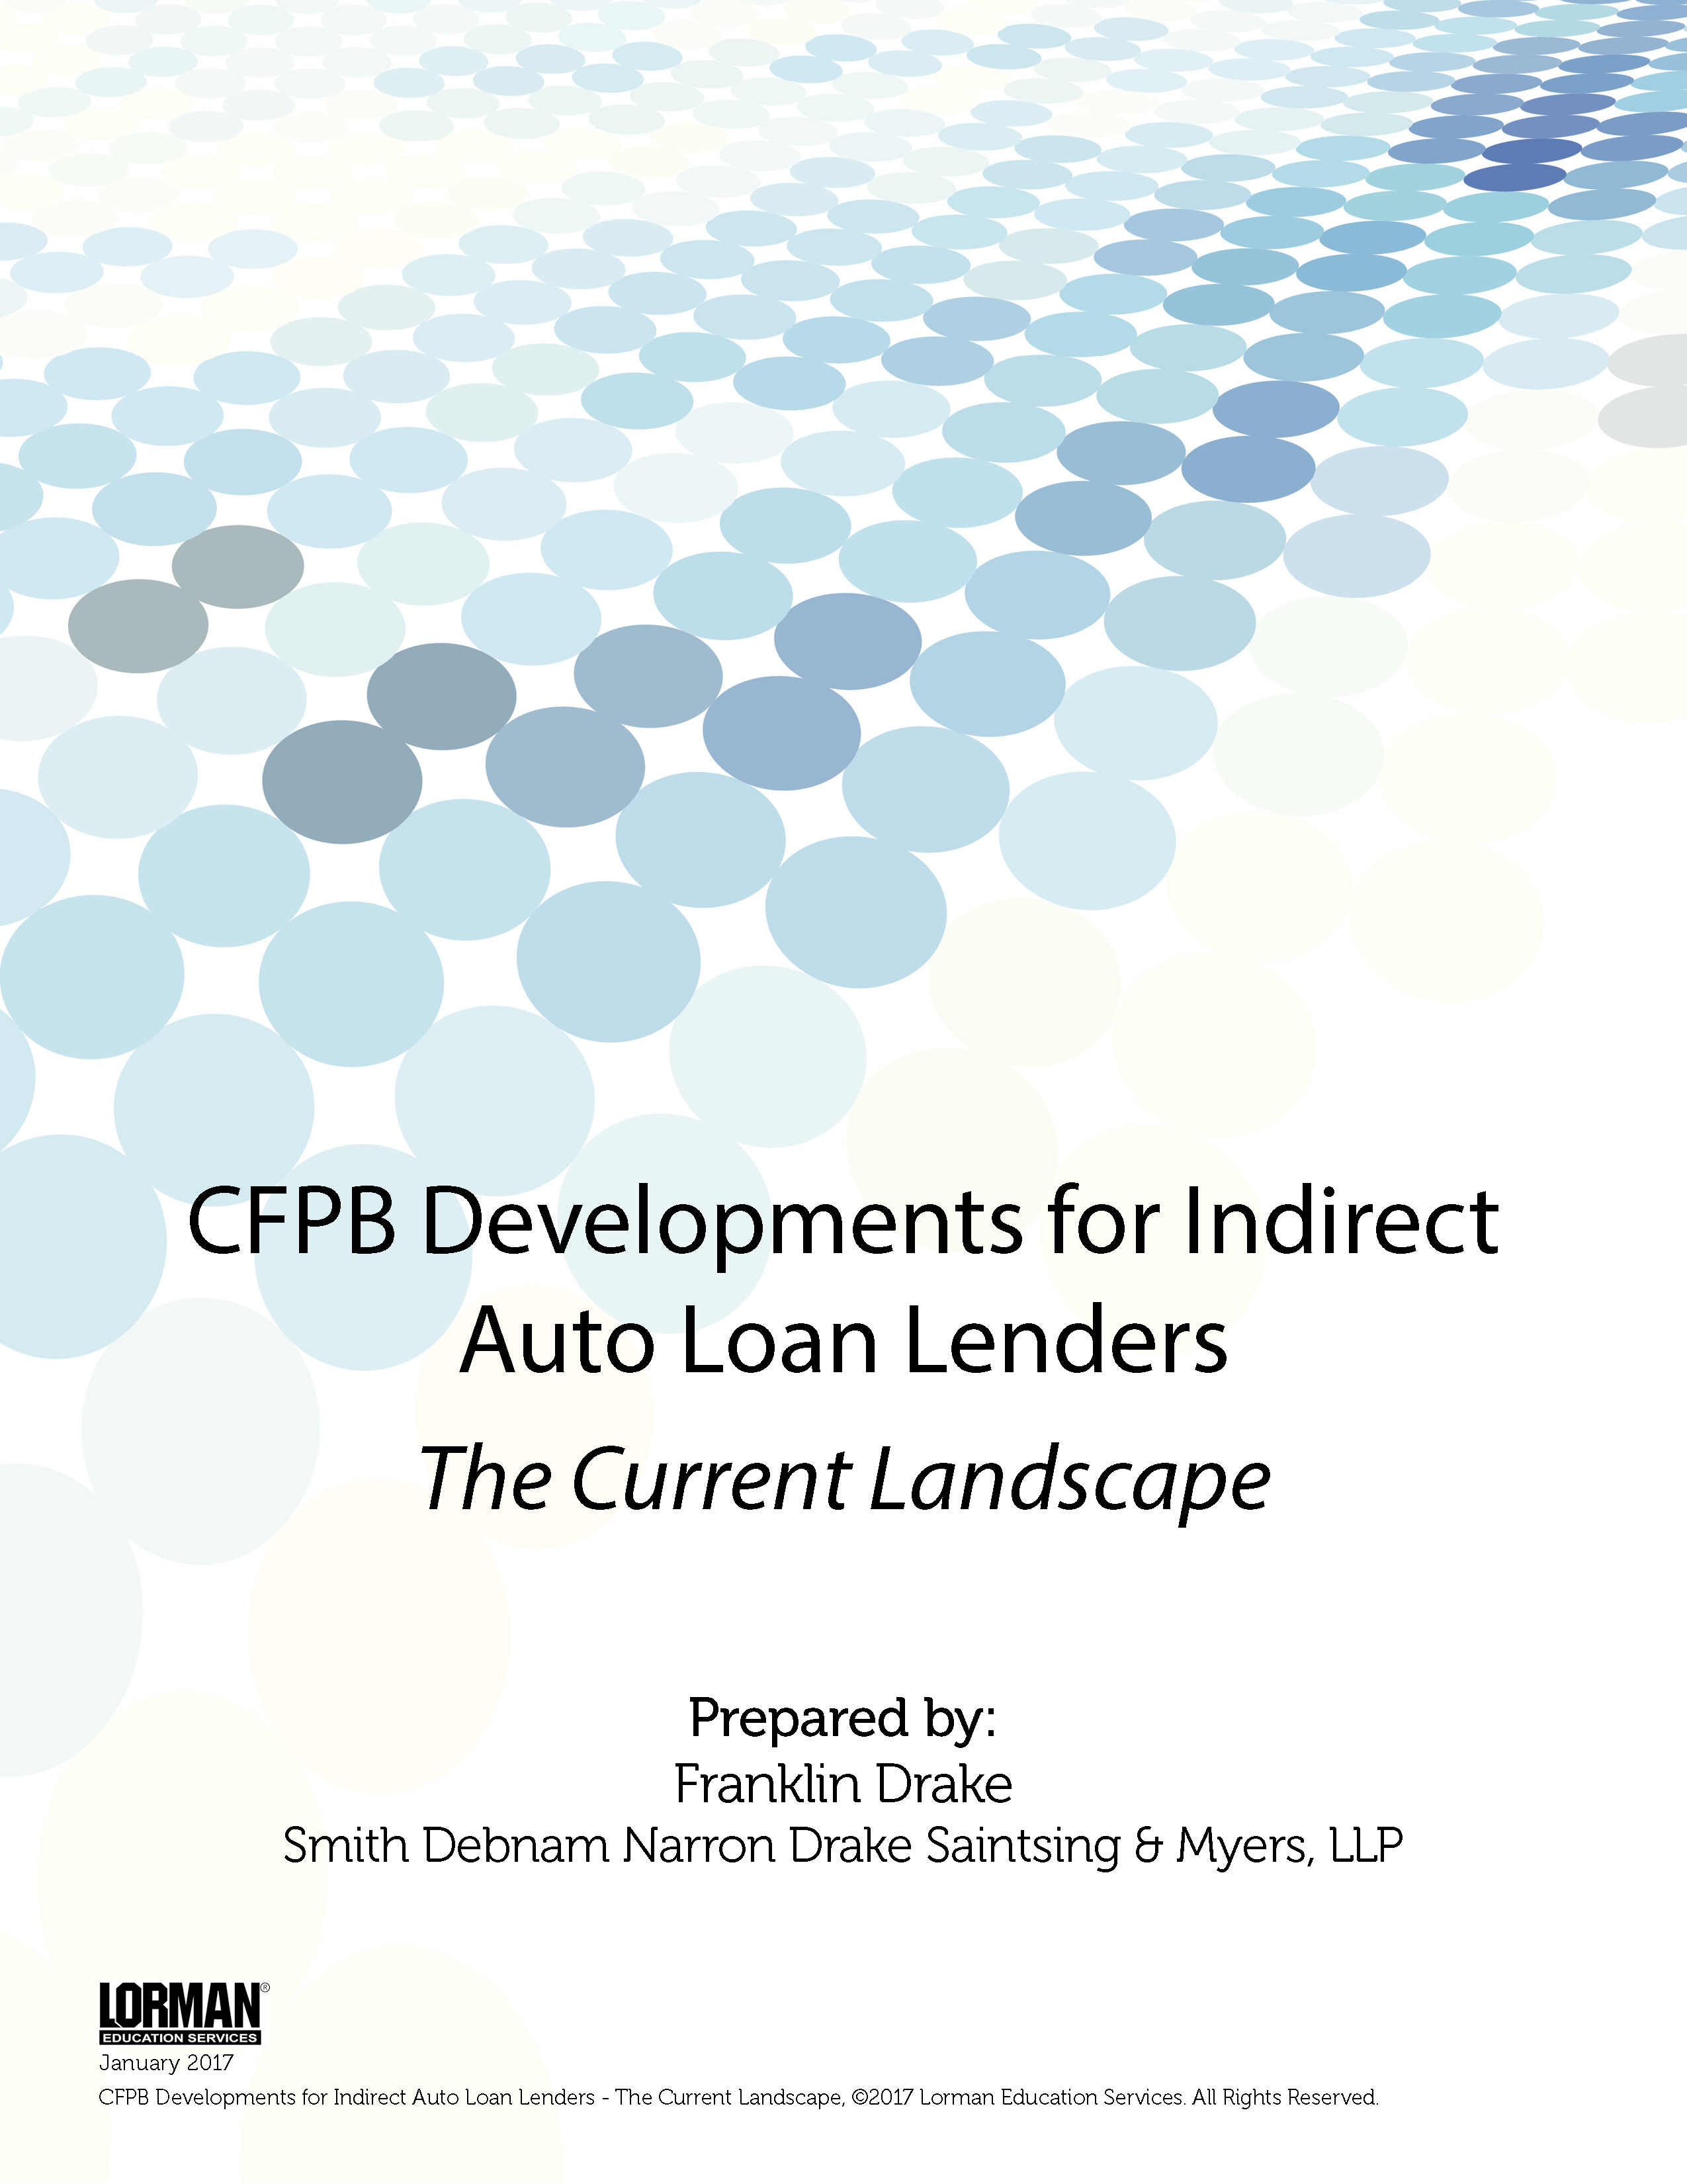 CFPB Developments for Indirect Auto Loan Lenders - The Current Landscape